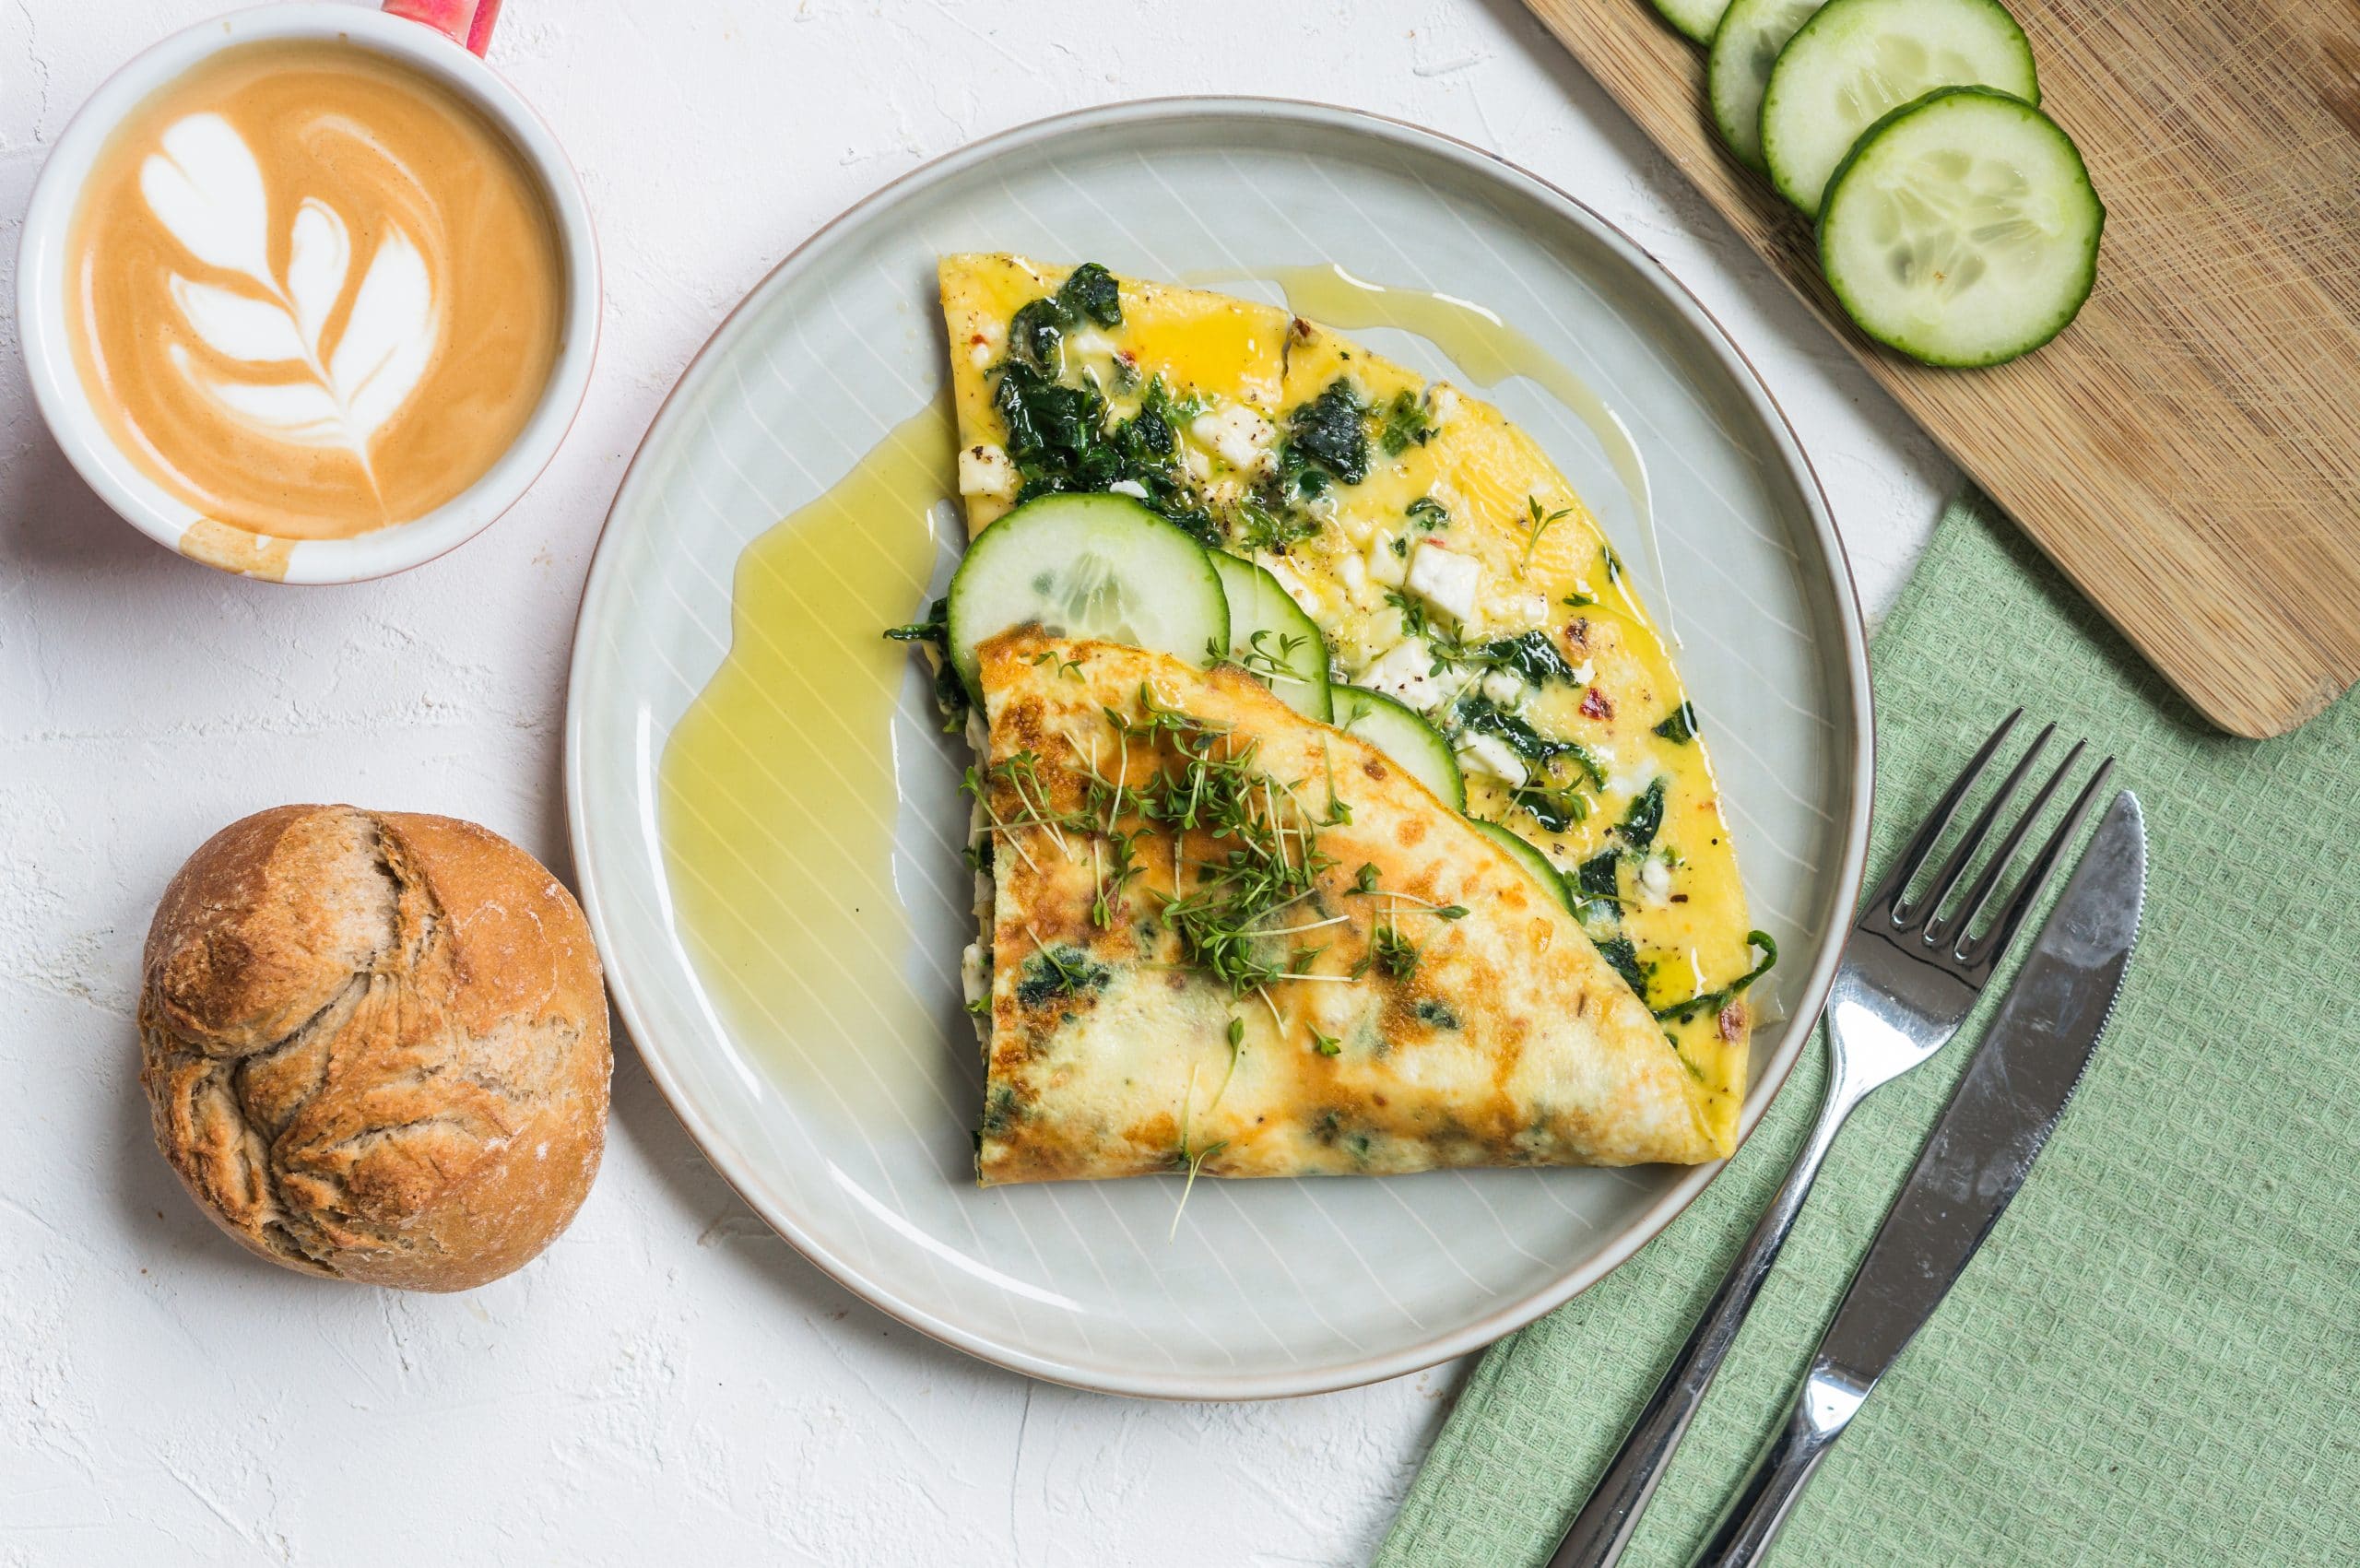 Spinach and Feta Omelet for Breakfast